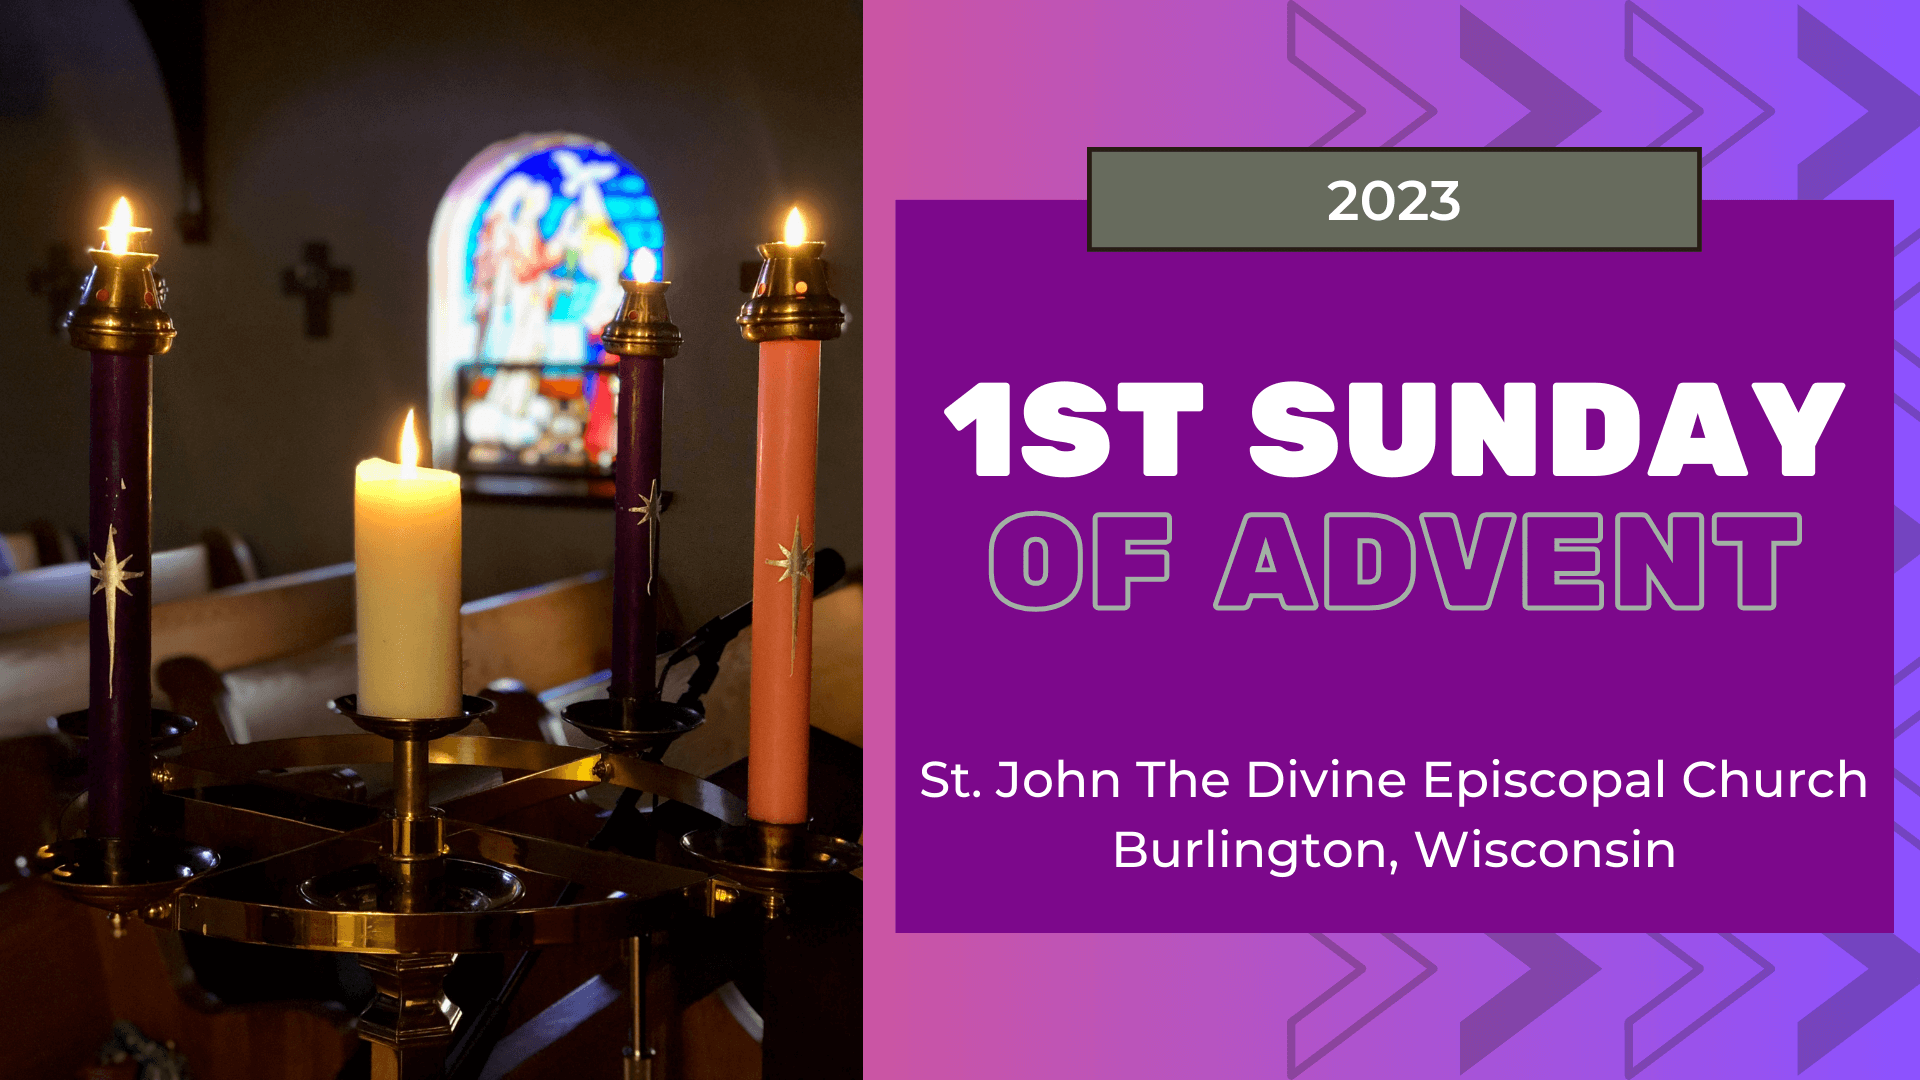 The First Sunday of Advent 2023